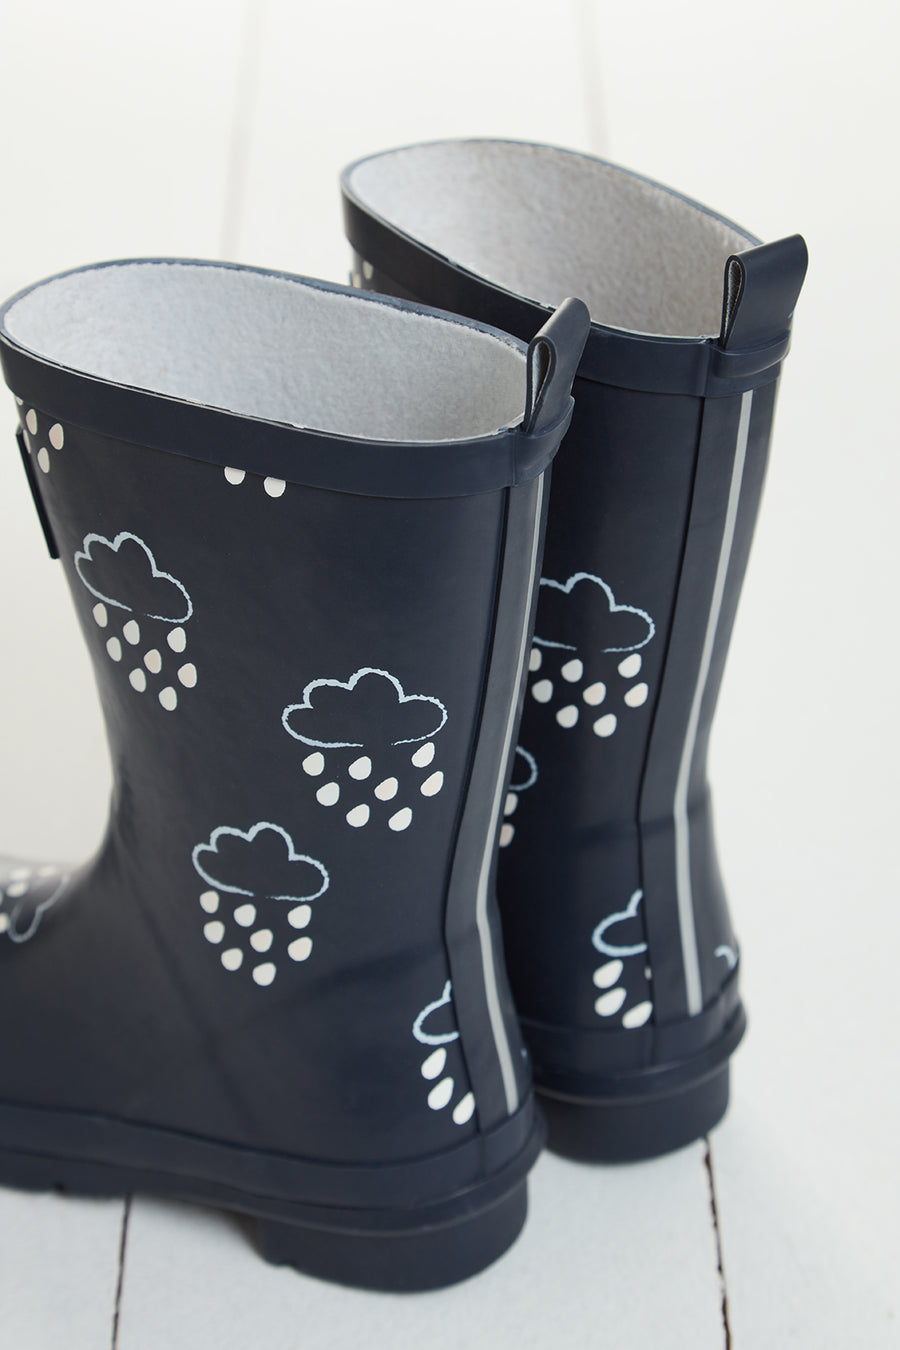 Grass and Air| Junior Wellies|Colour Changing|Navy